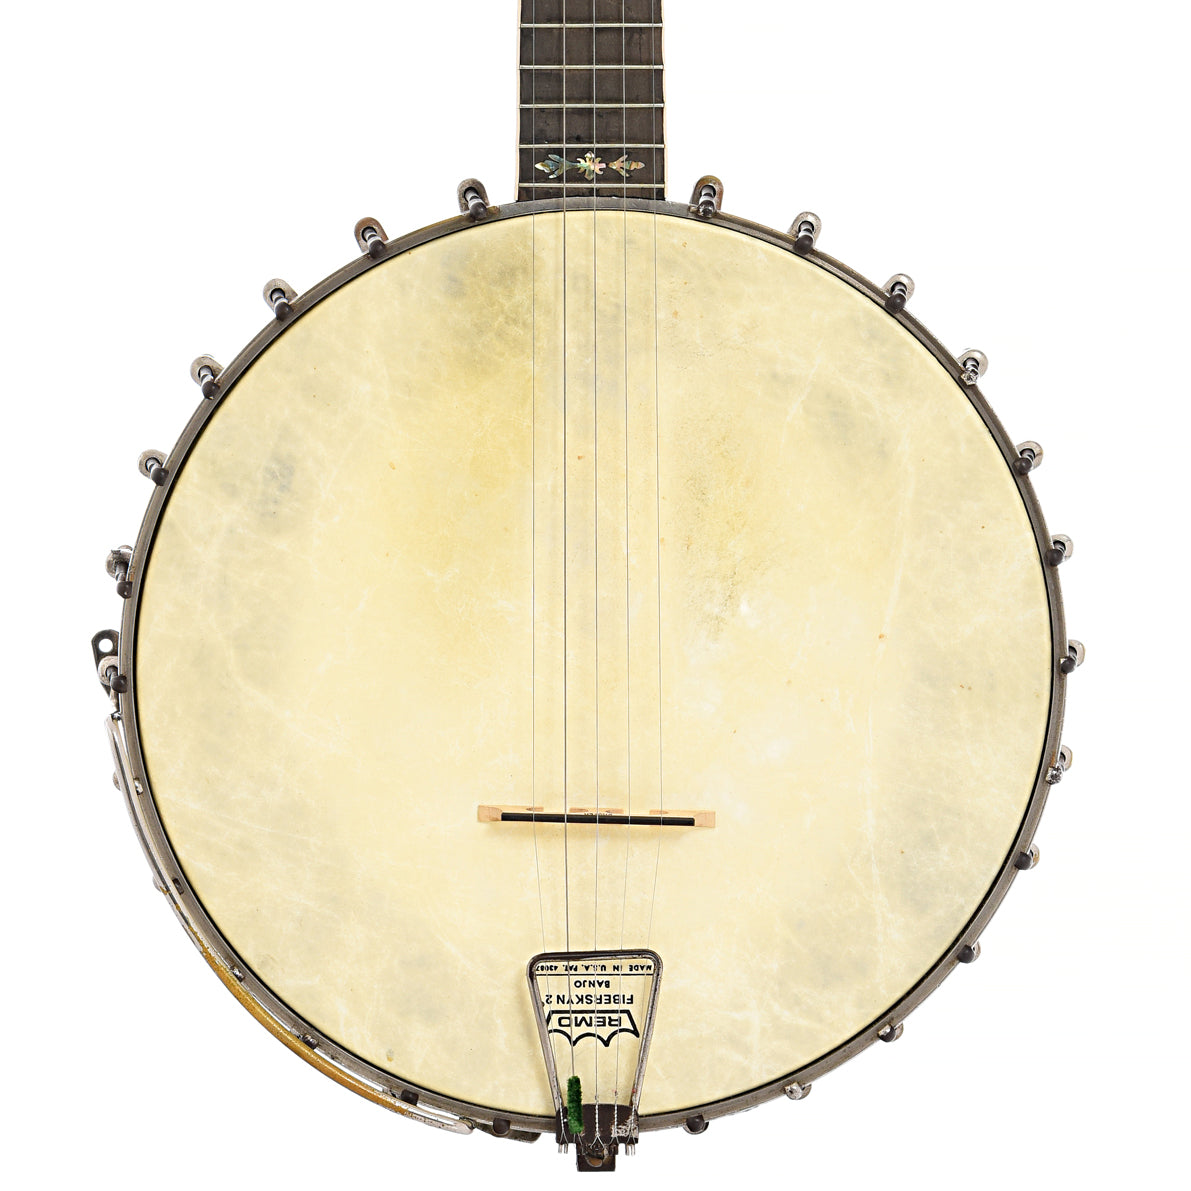 Front of Bacon Professional FF2 Special Openback Banjo (c.1920)